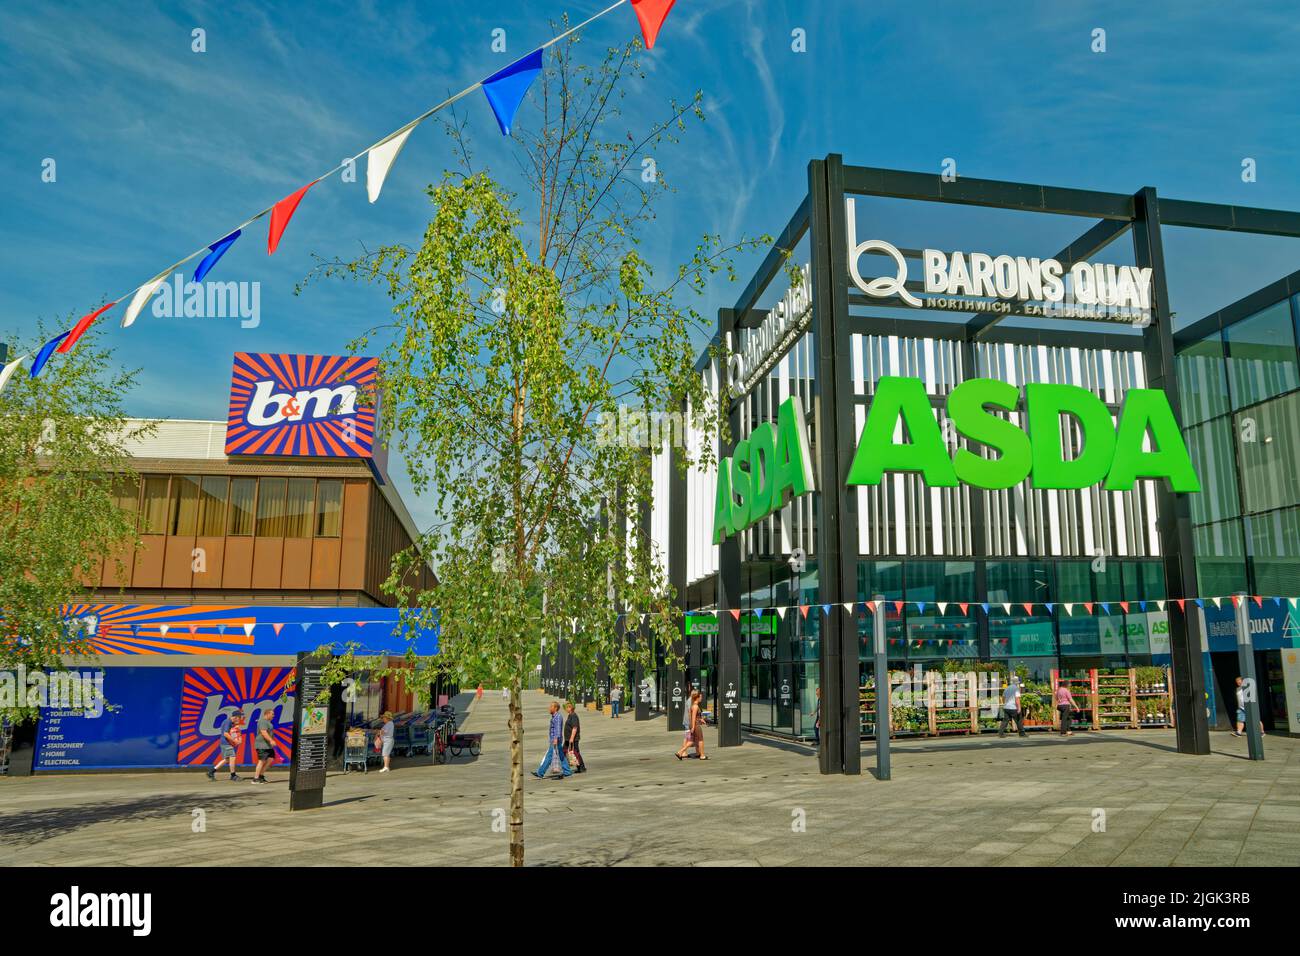 The Asda and B&M stores at new Barons Quay development in Northwich town centre, Cheshire, England, UK. B&M replaced M&S during 2021. Stock Photo